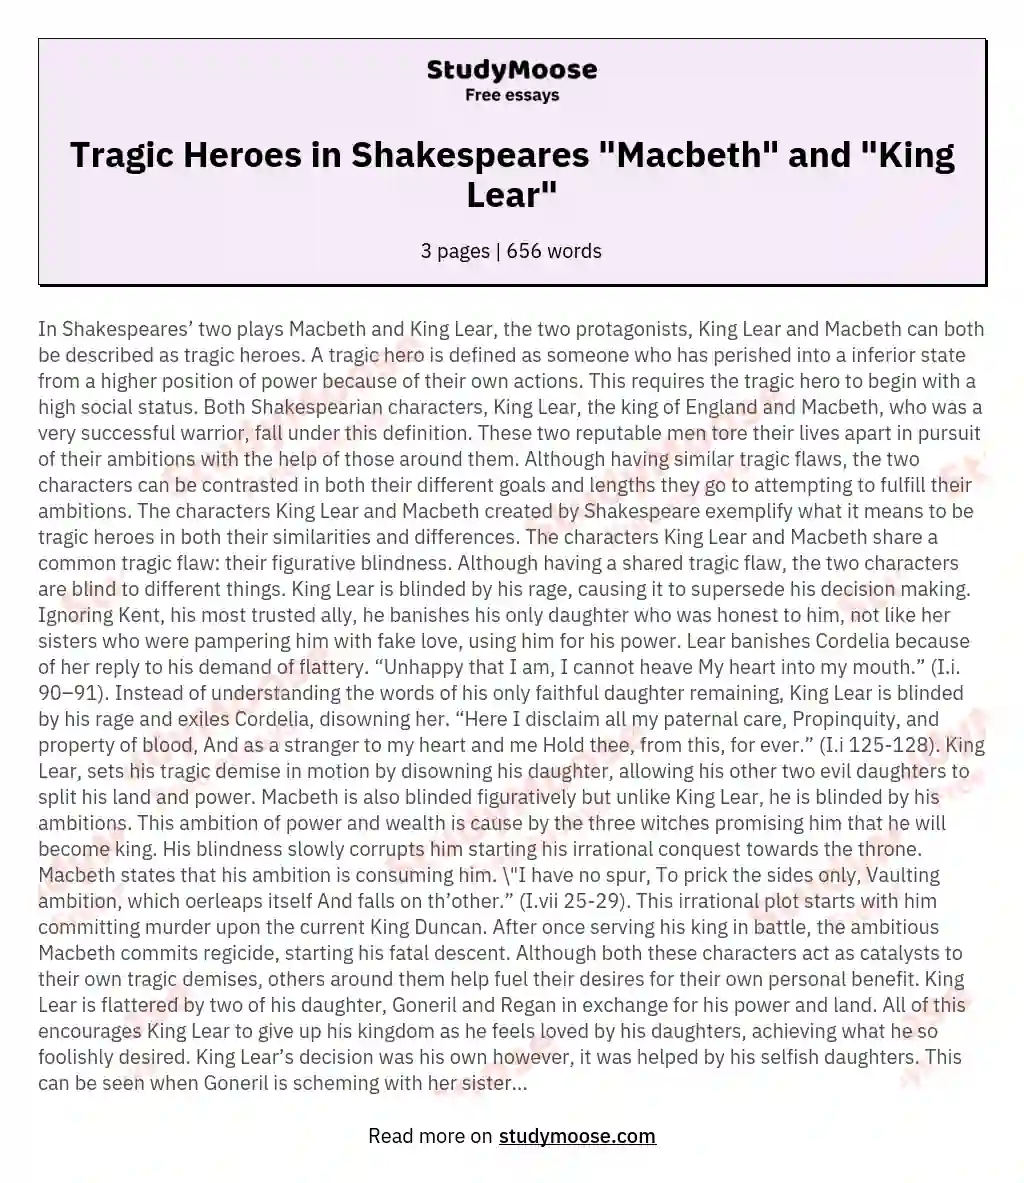 Tragic Heroes in Shakespeares "Macbeth" and "King Lear" essay